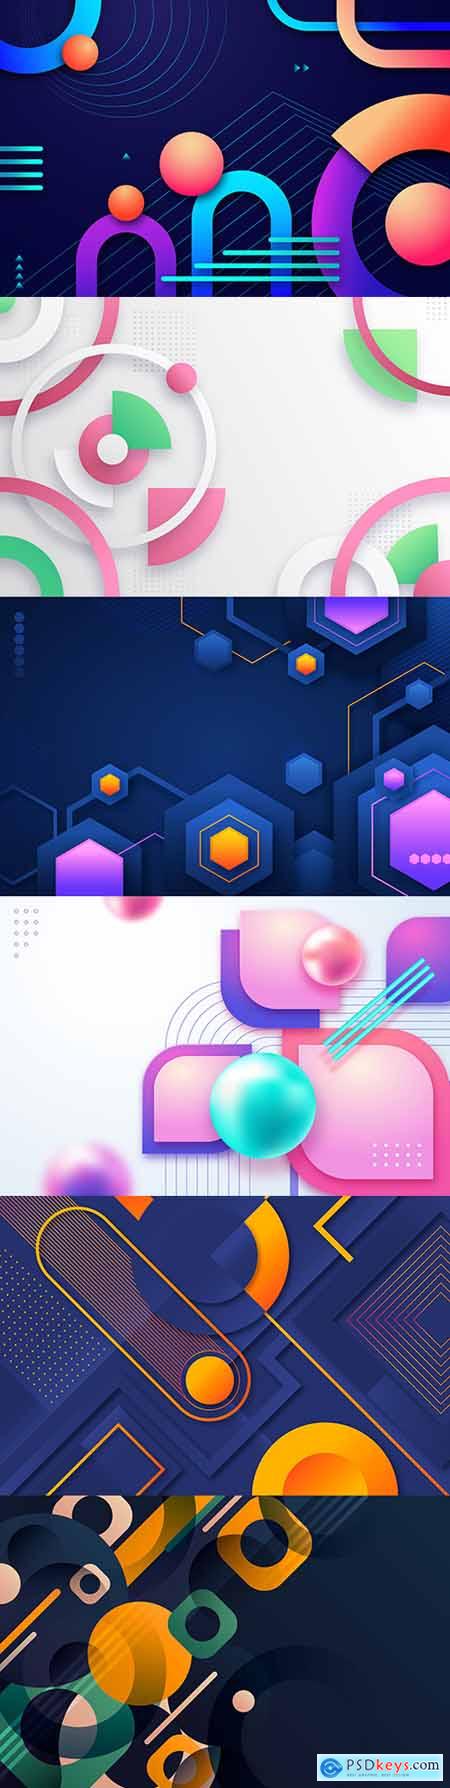 Gradient abstract design geometric background shape 4